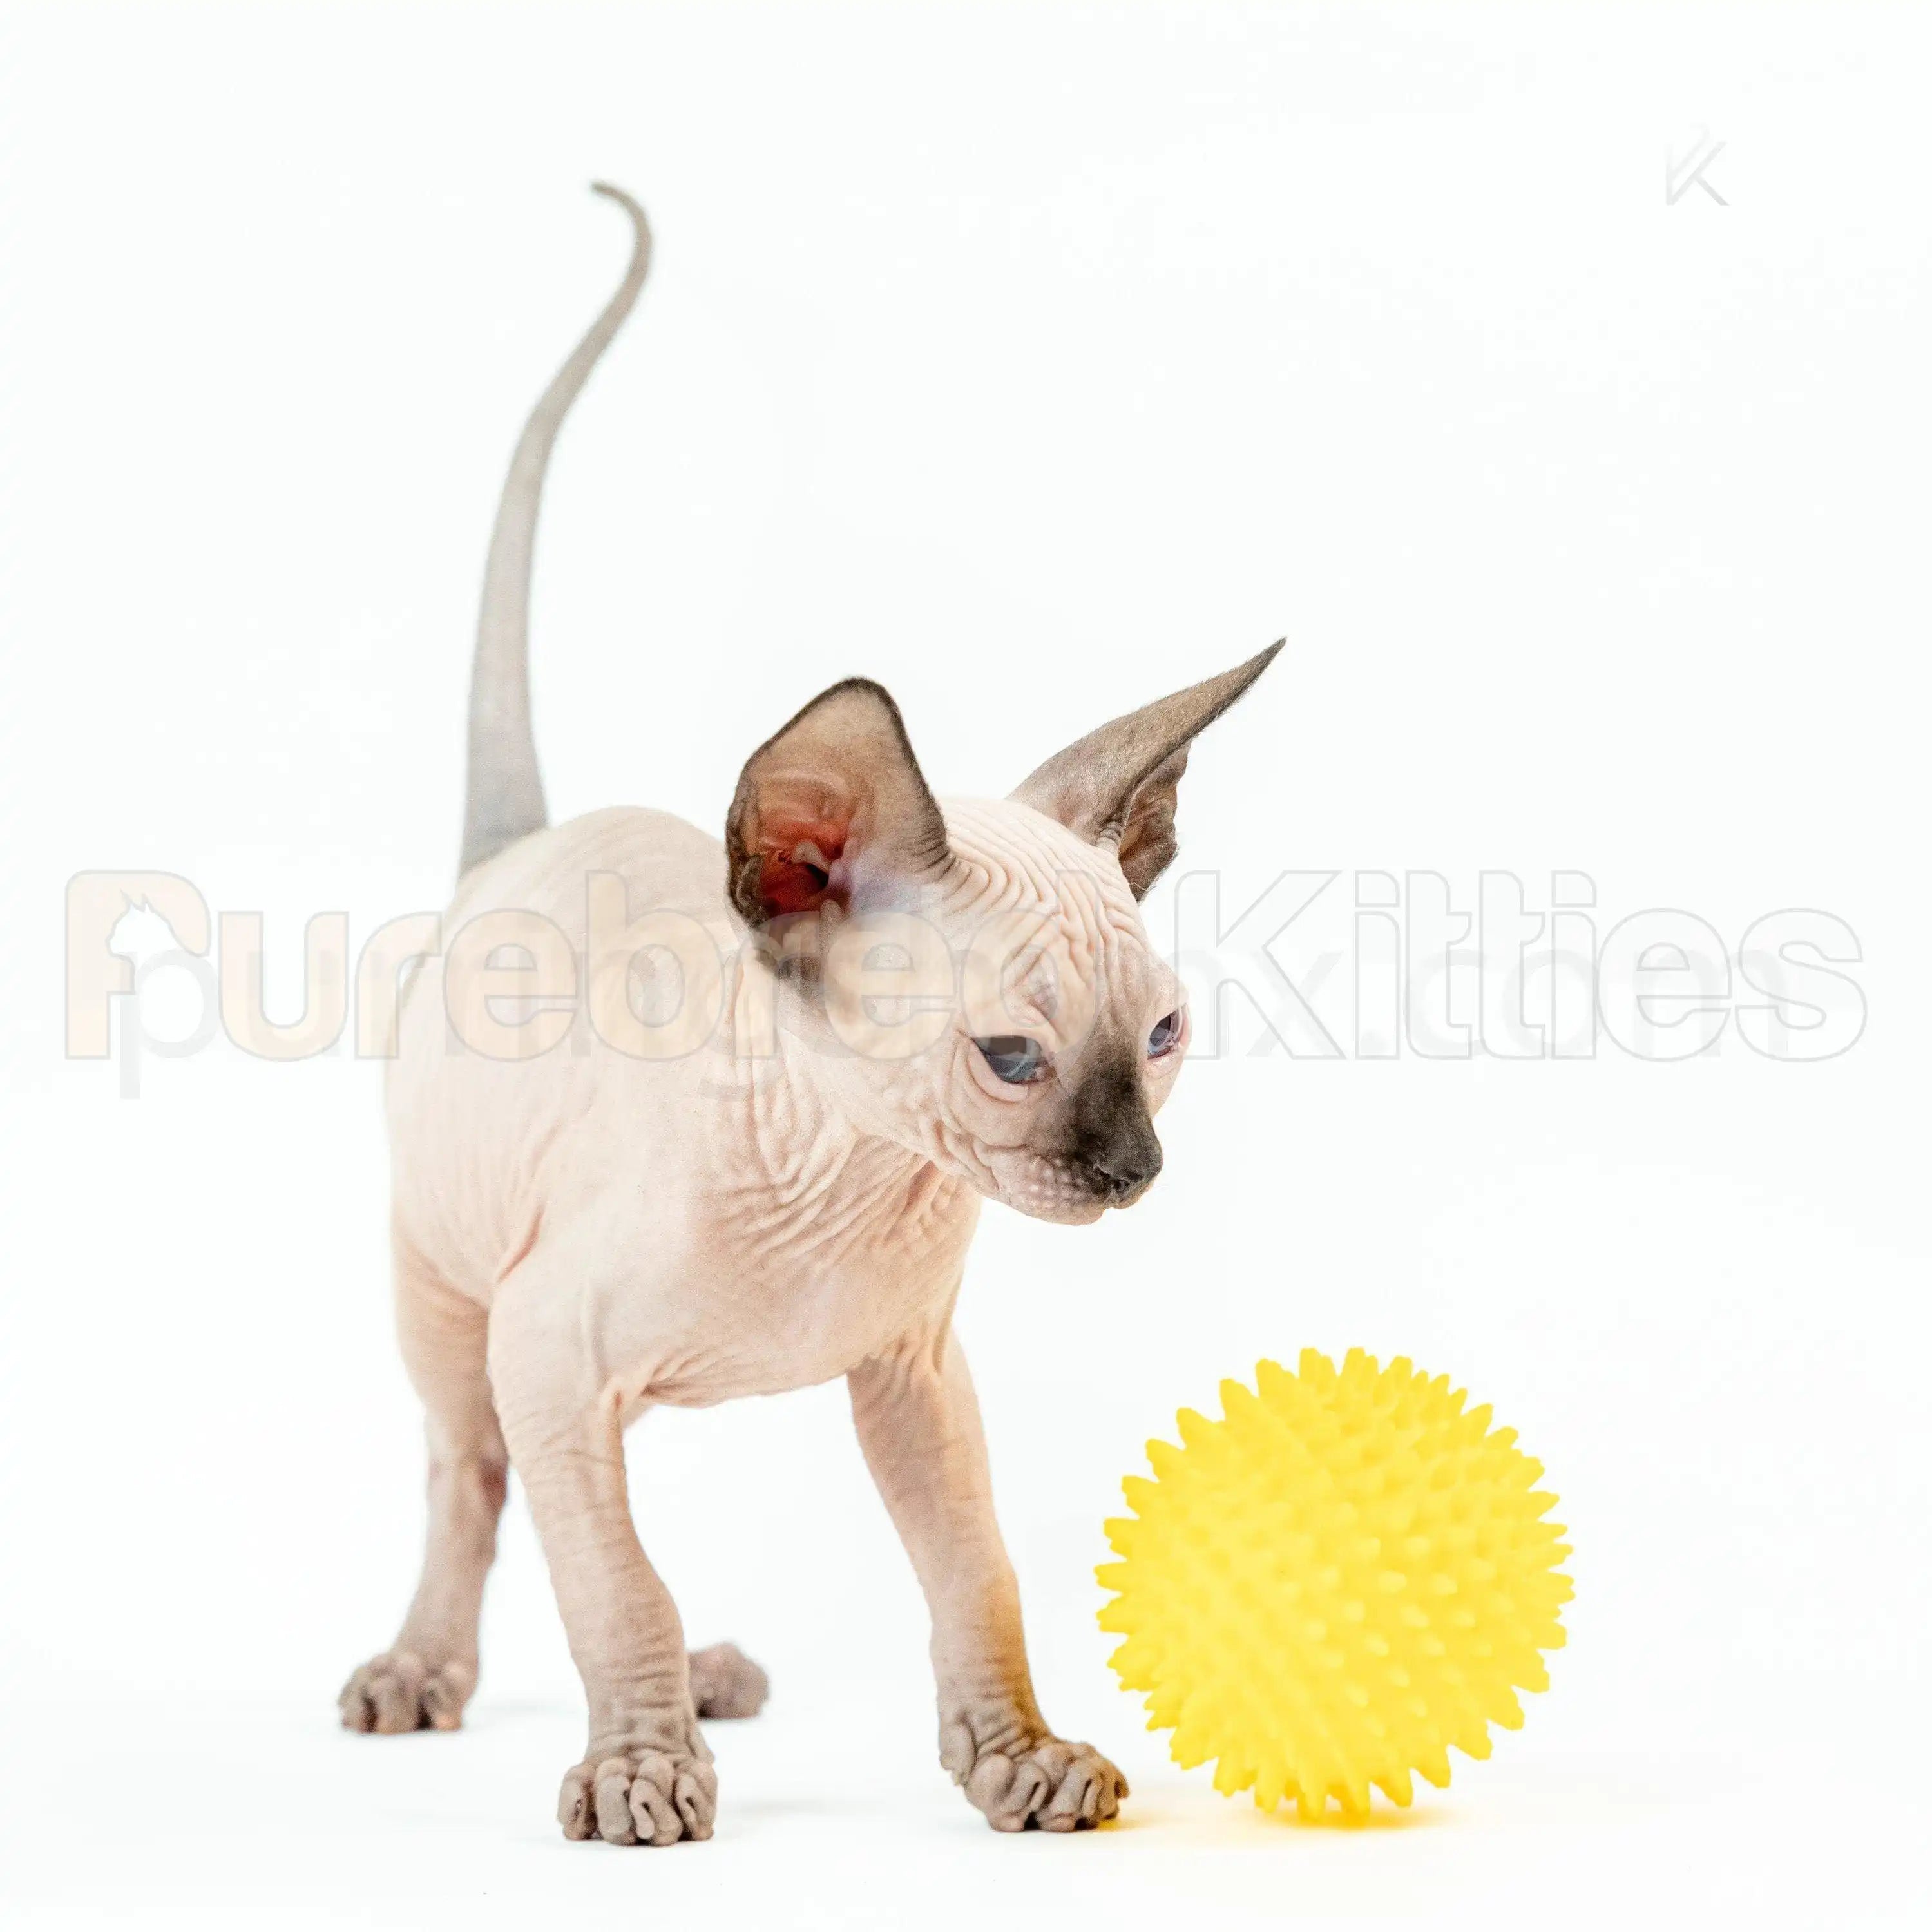 Sphynx Cats and Kittens for Sale Yoda | Kitten